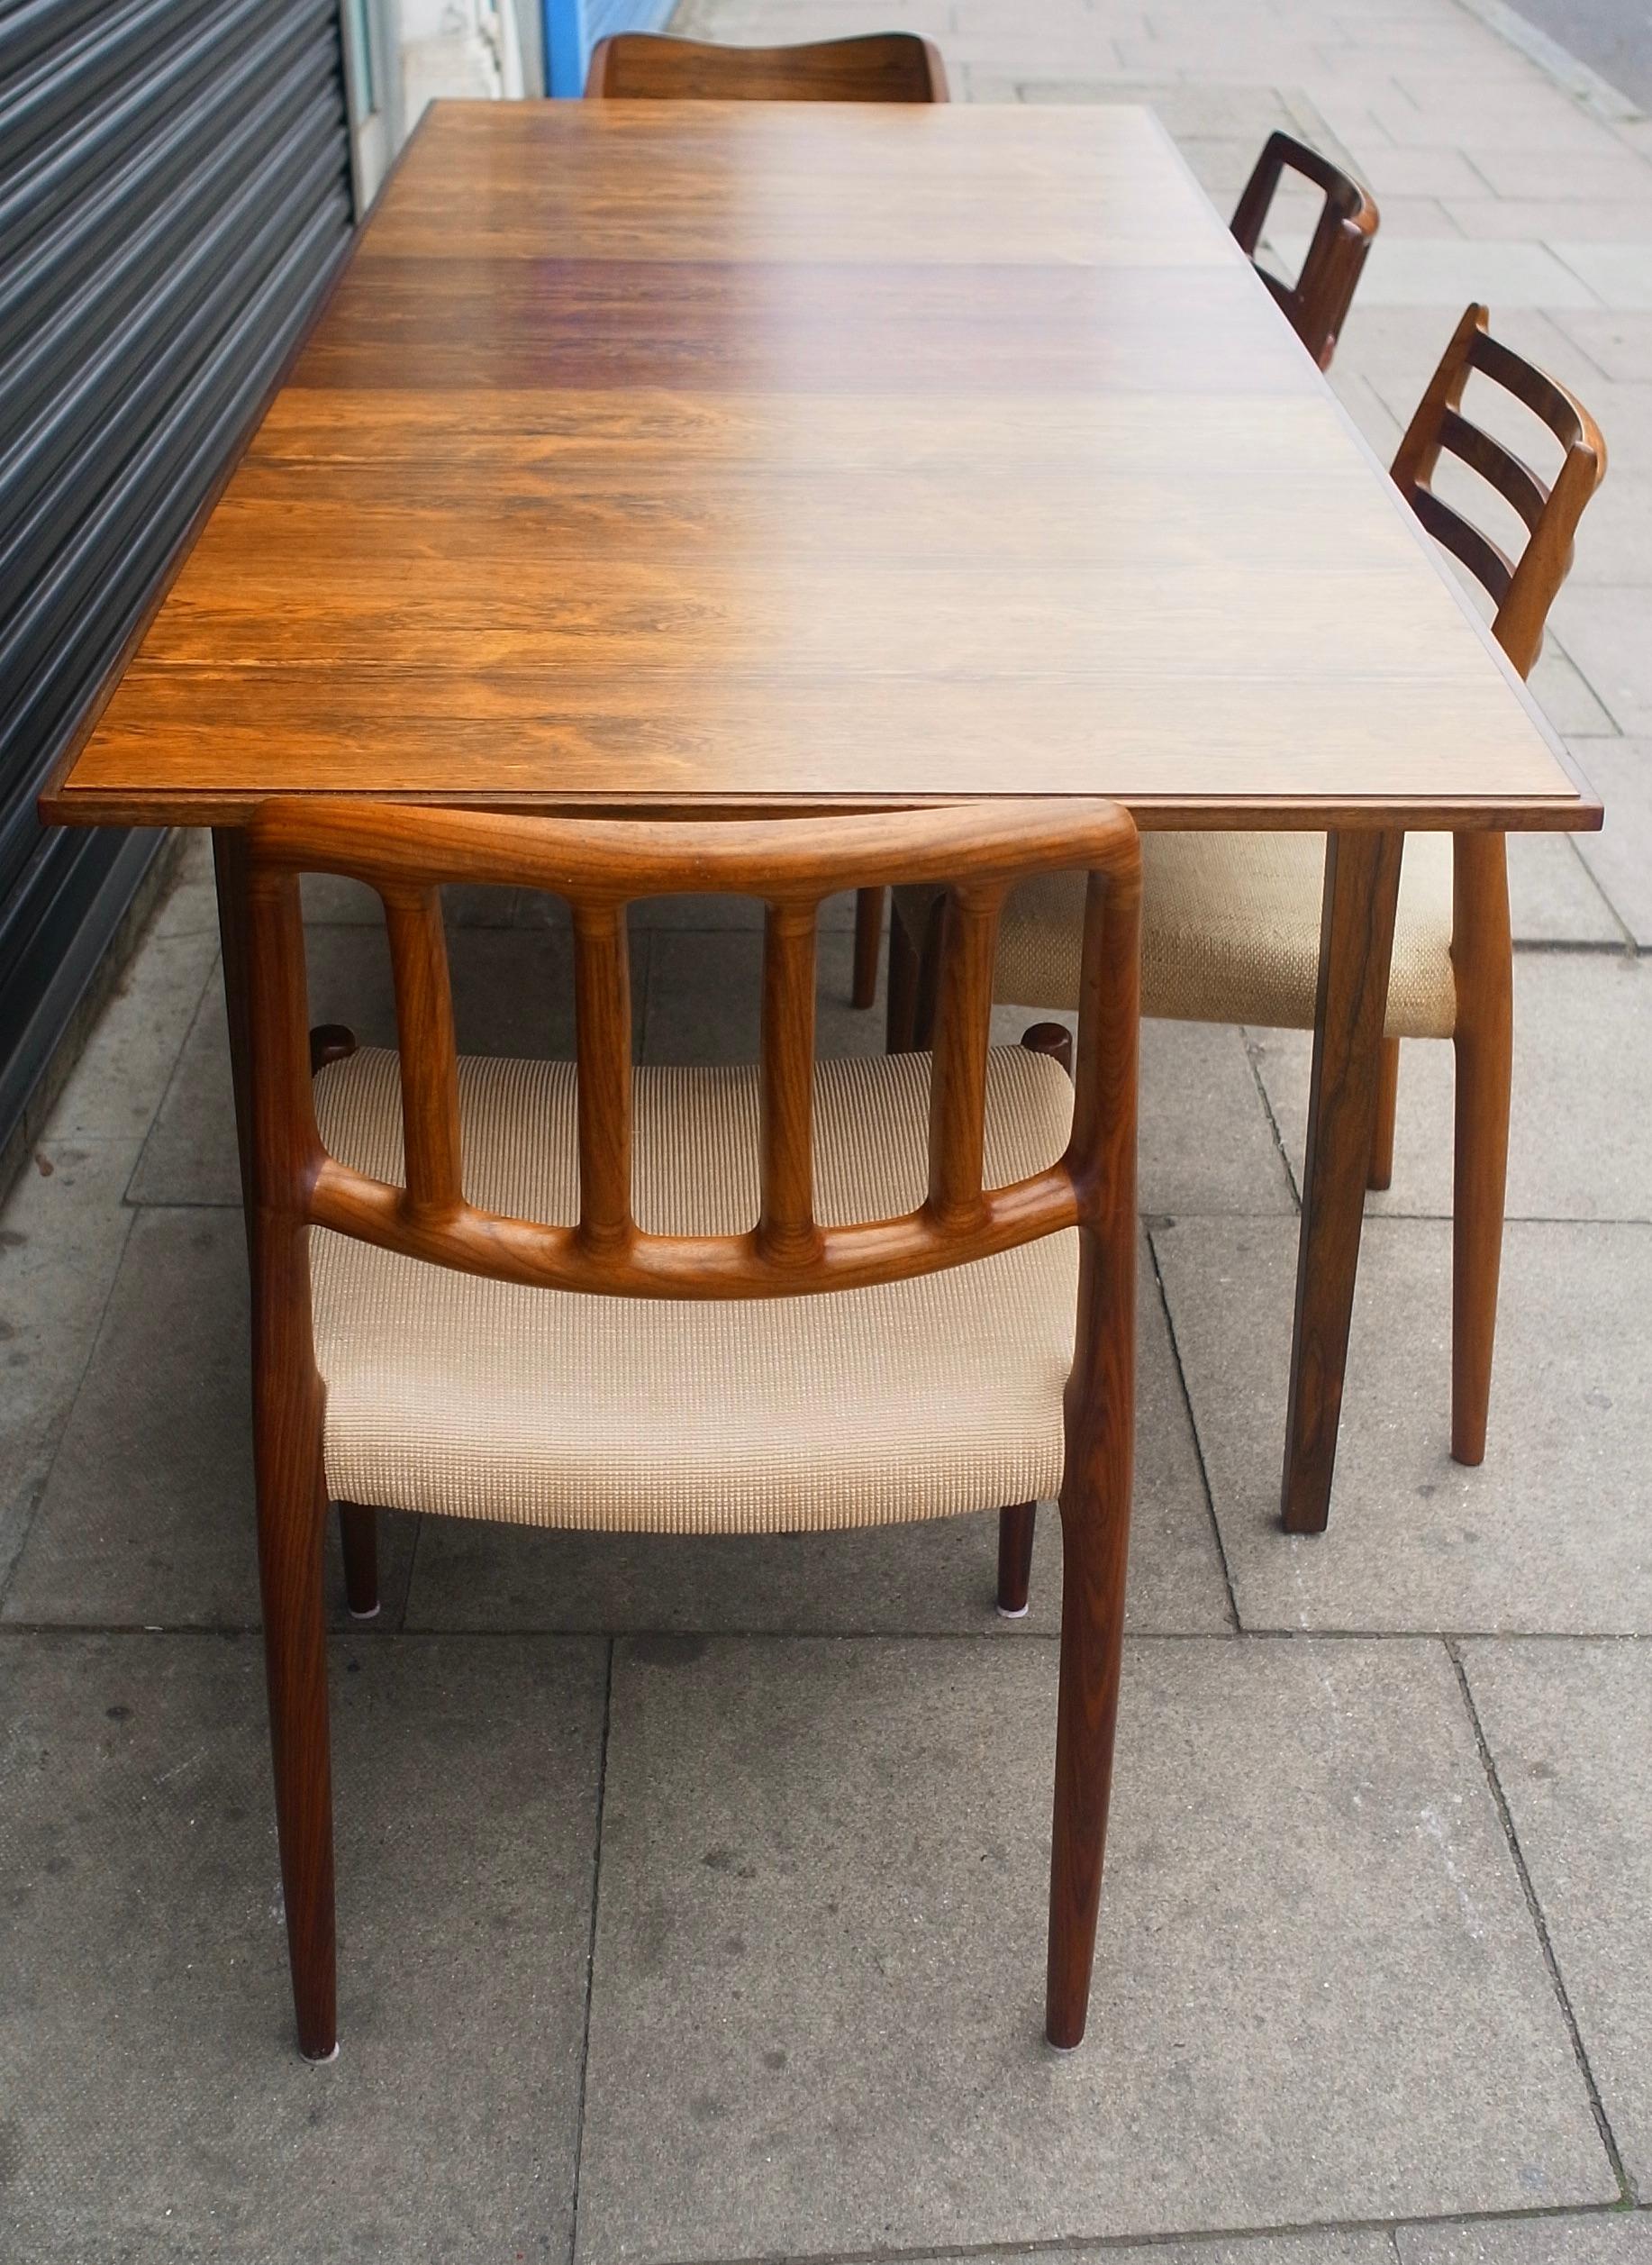 A very fine 1960s rectangular hardwood English dining table designed by Robert Heritage for Archie Shine. This table has the simplicity and timeless classic lines of the era that it hails from. The quality of materials and the craftsmanship utilised